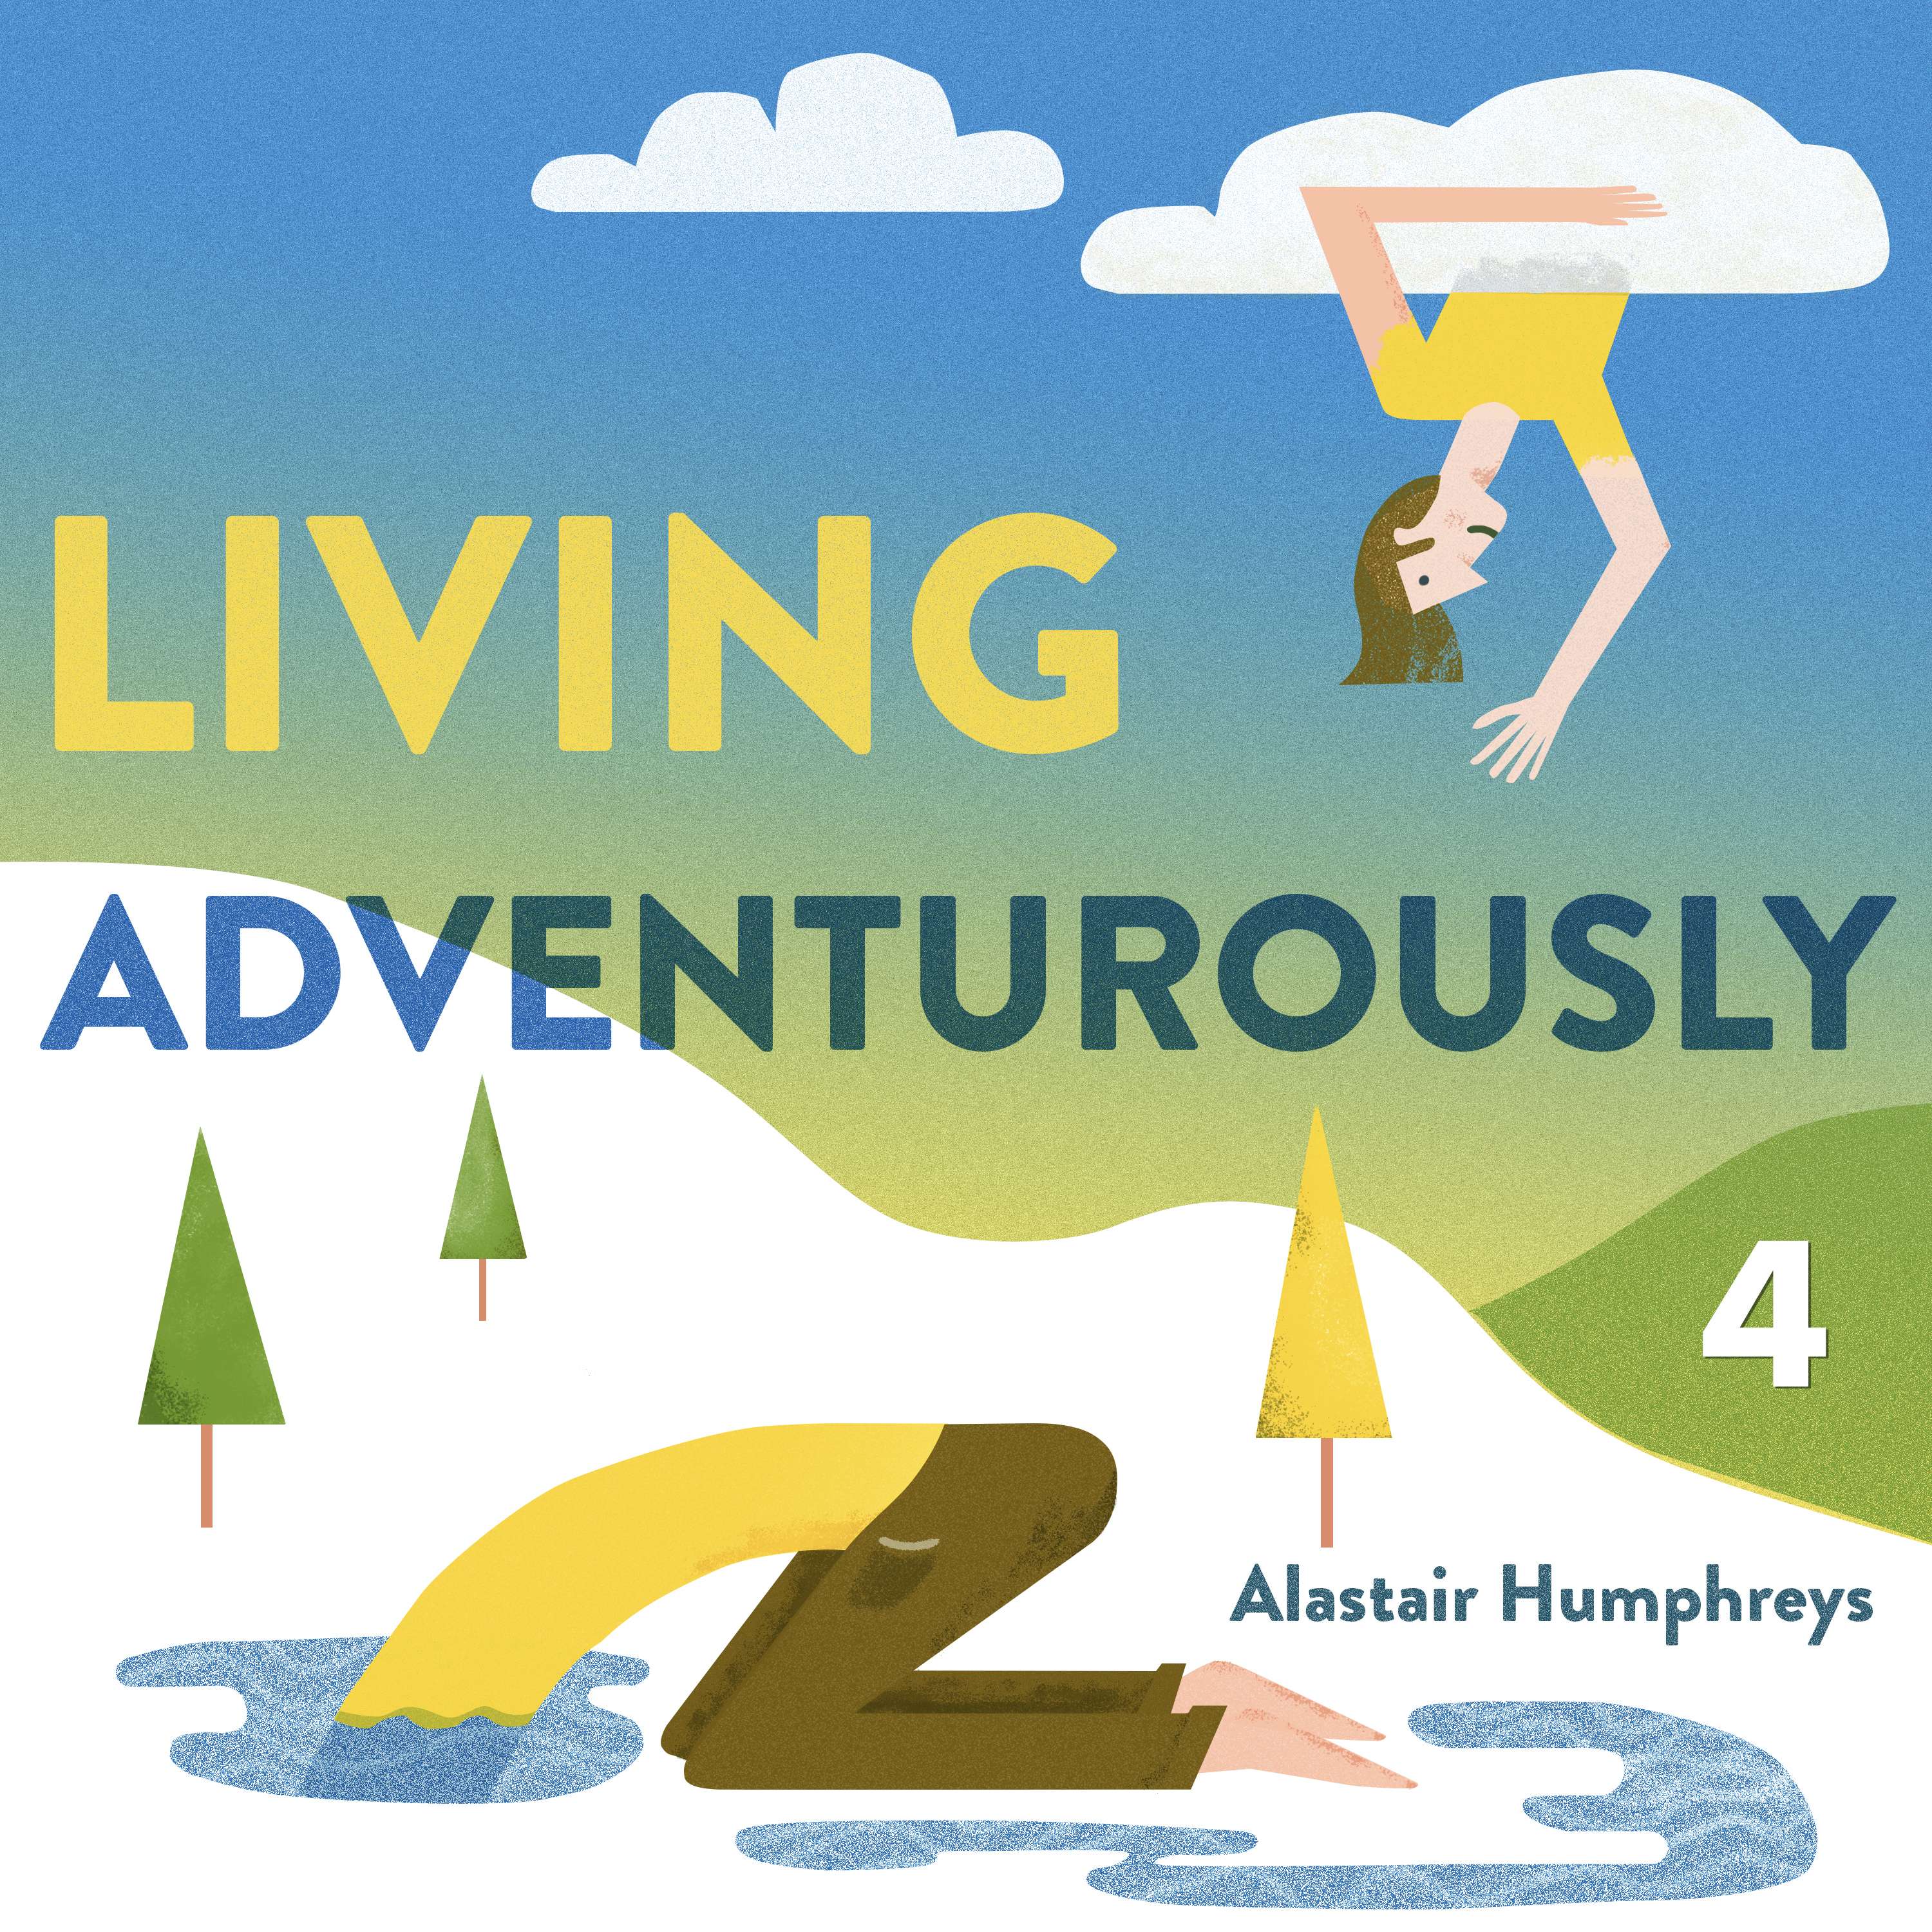 Living Adventurously is About Trying to Not Be at Work - Living Adventurously #4